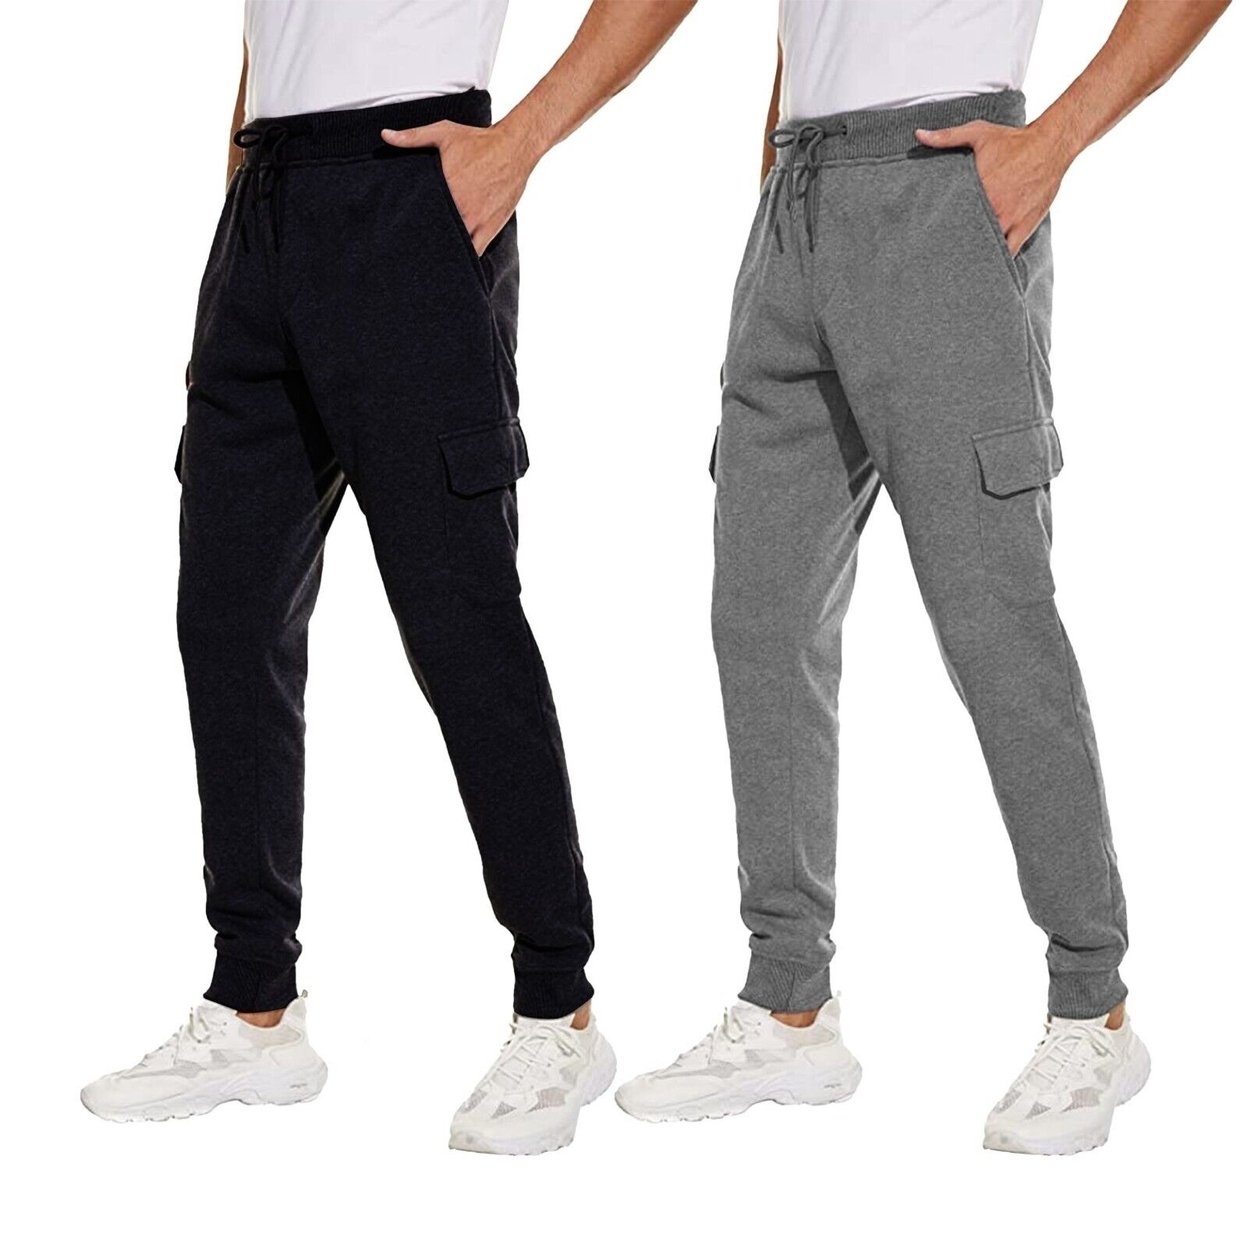 2-Pack Men's Ultra Soft Winter Warm Thick Athletic Sherpa Lined Jogger Pants - Black&grey, Small